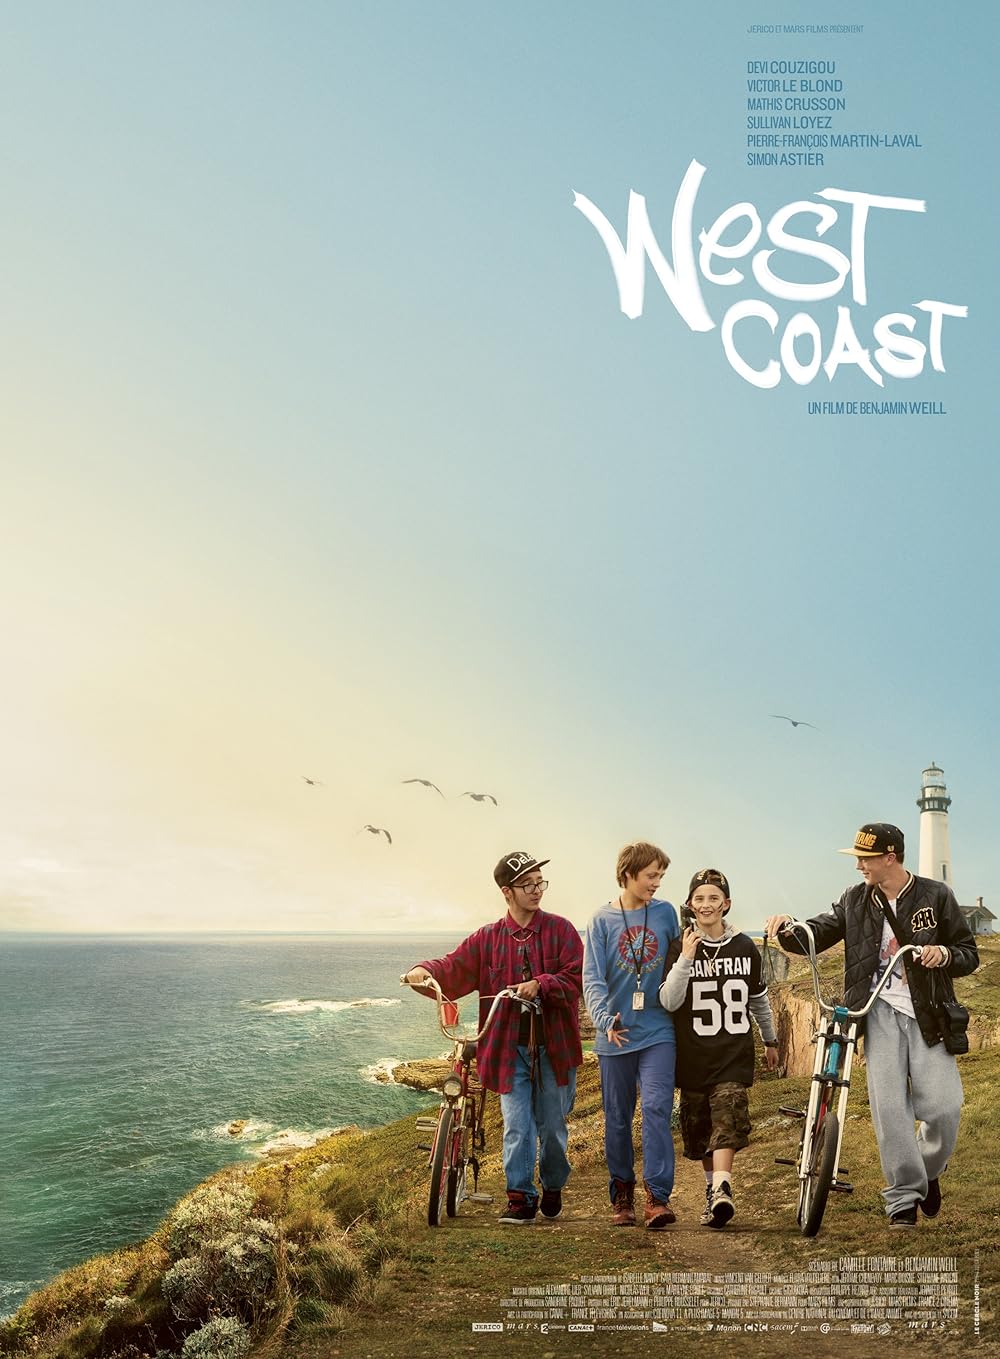 brittany isbel share west coast productions trailers photos